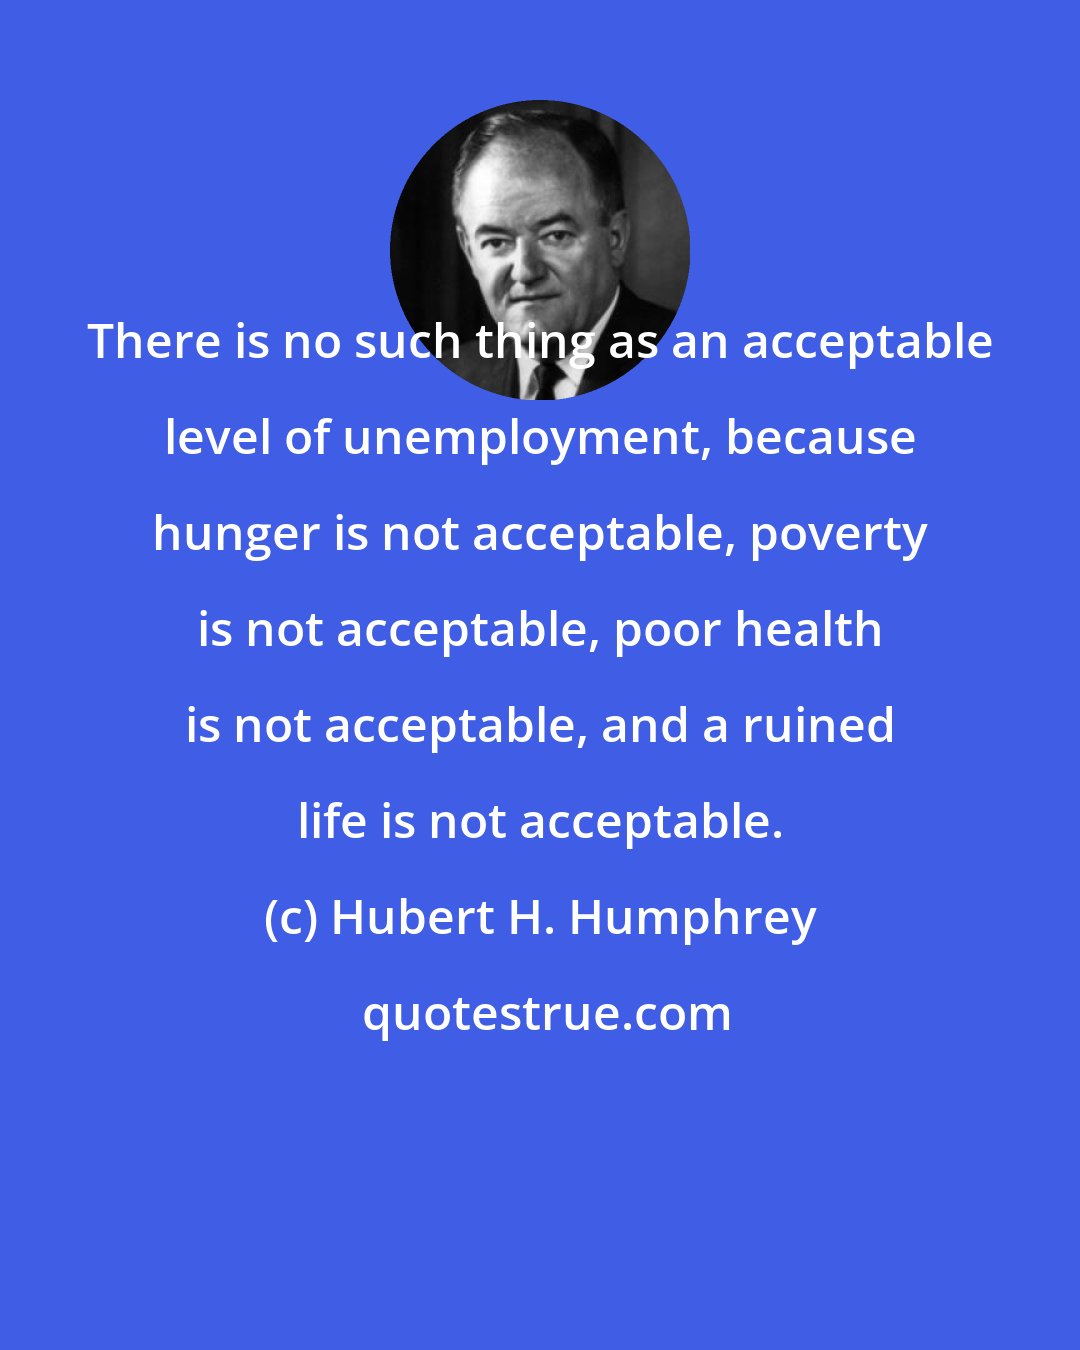 Hubert H. Humphrey: There is no such thing as an acceptable level of unemployment, because hunger is not acceptable, poverty is not acceptable, poor health is not acceptable, and a ruined life is not acceptable.